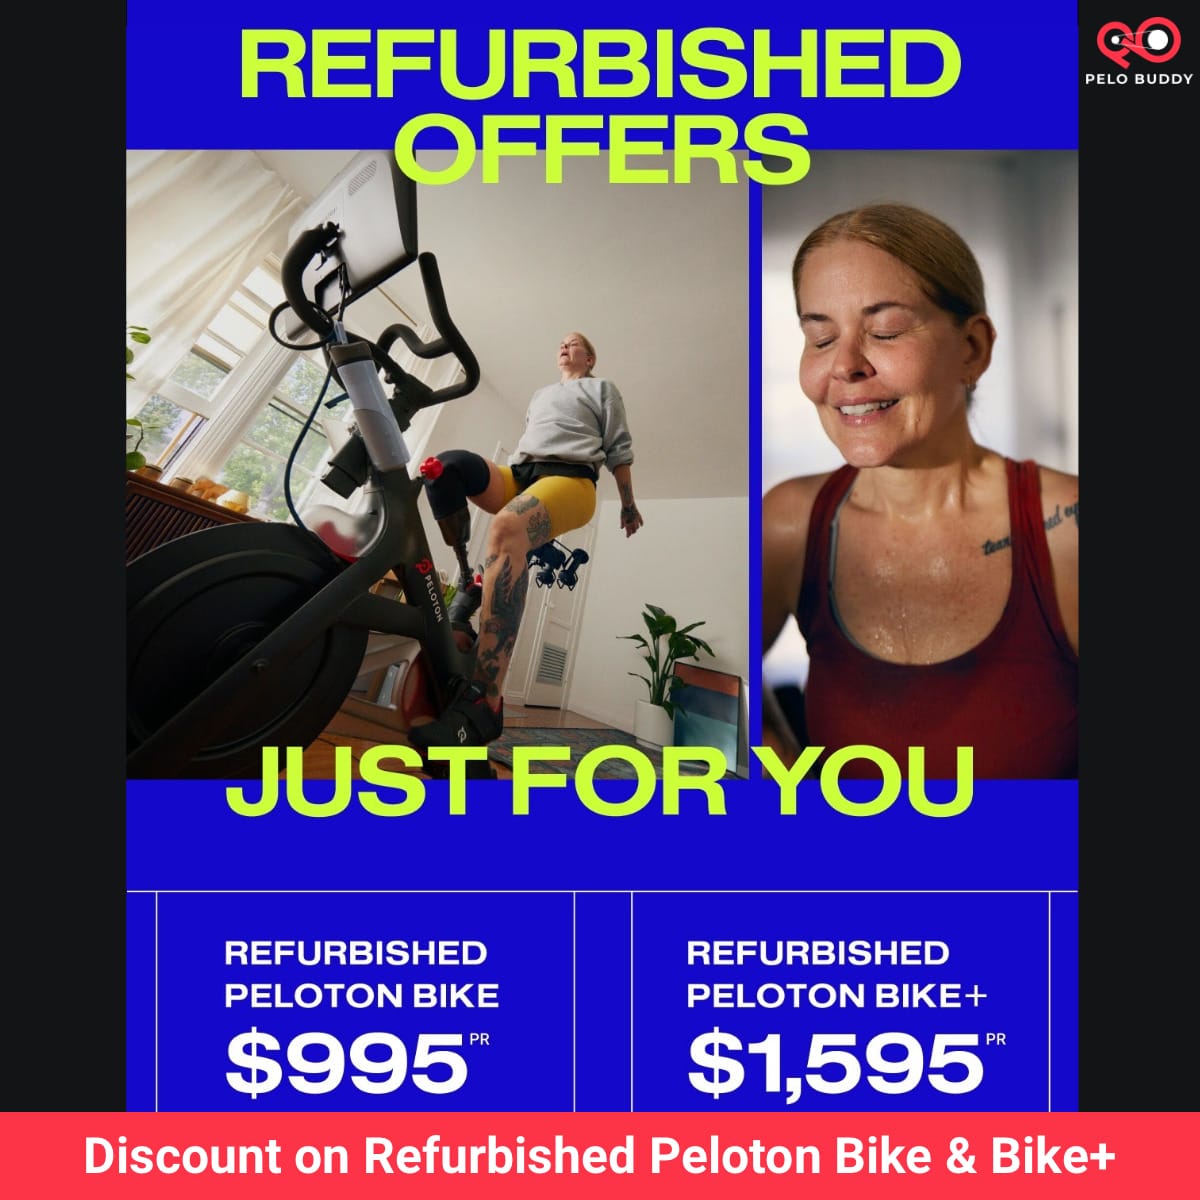 Discounted Refurbished Peloton Bikes ($995) and Bikes+ ($1595) for sale until August 21, 2023